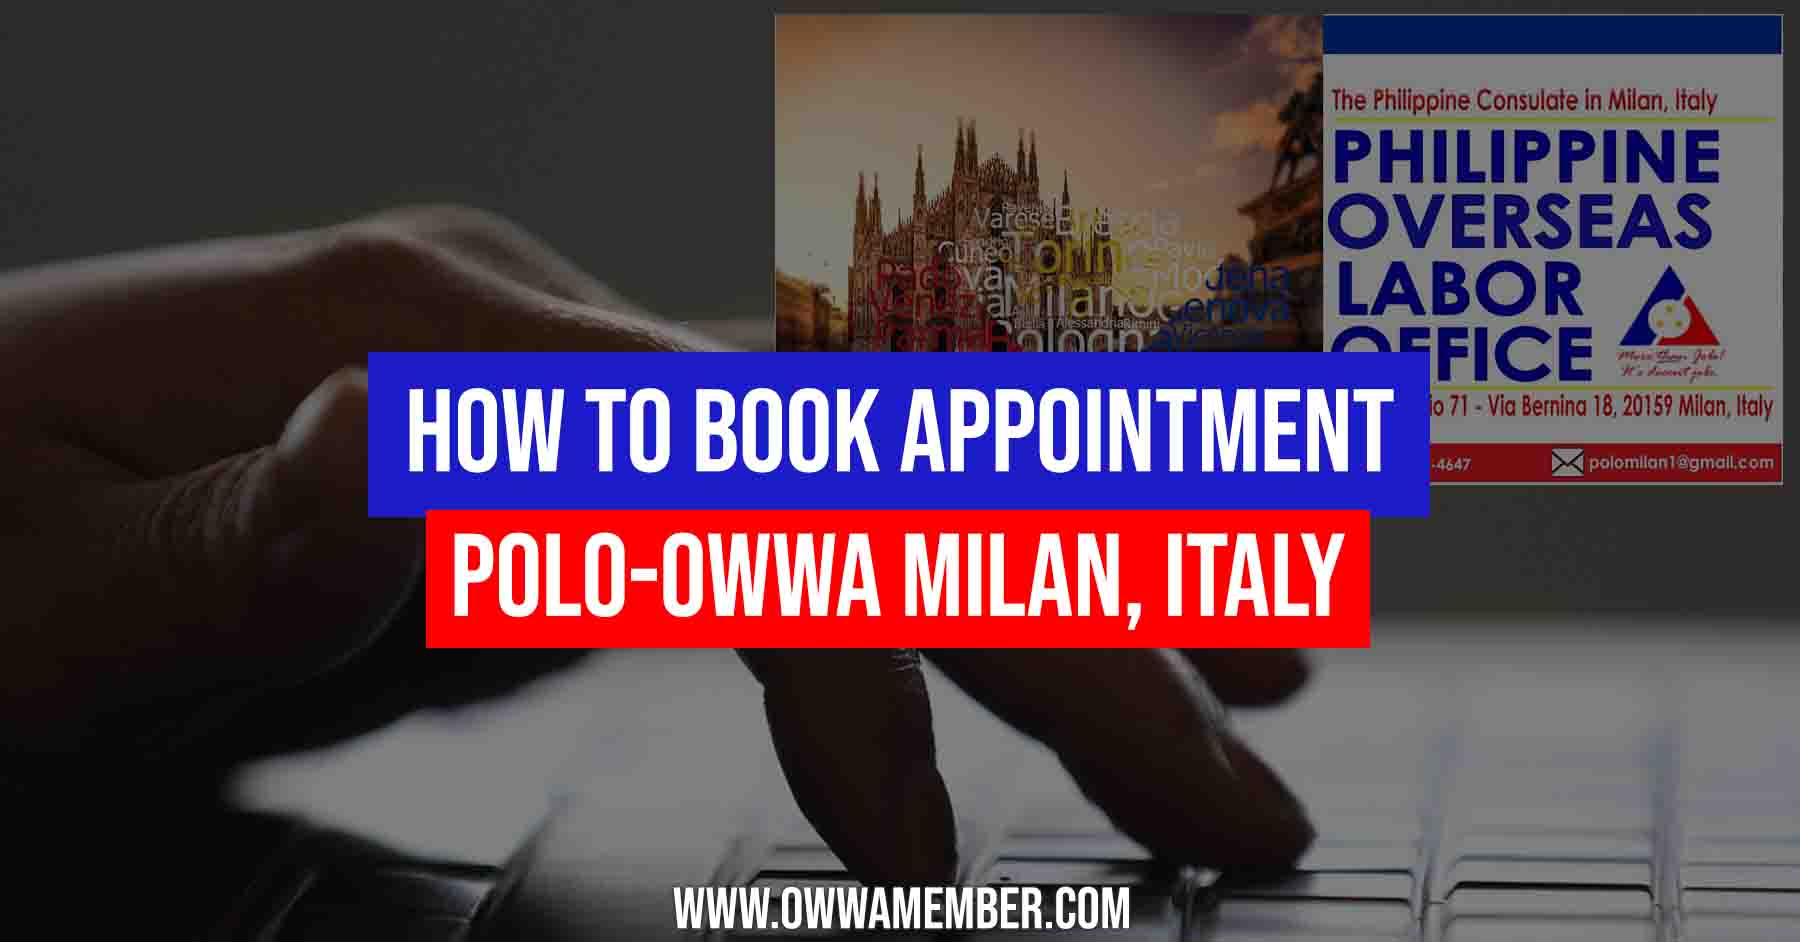 how to book appointment owwa milan italy